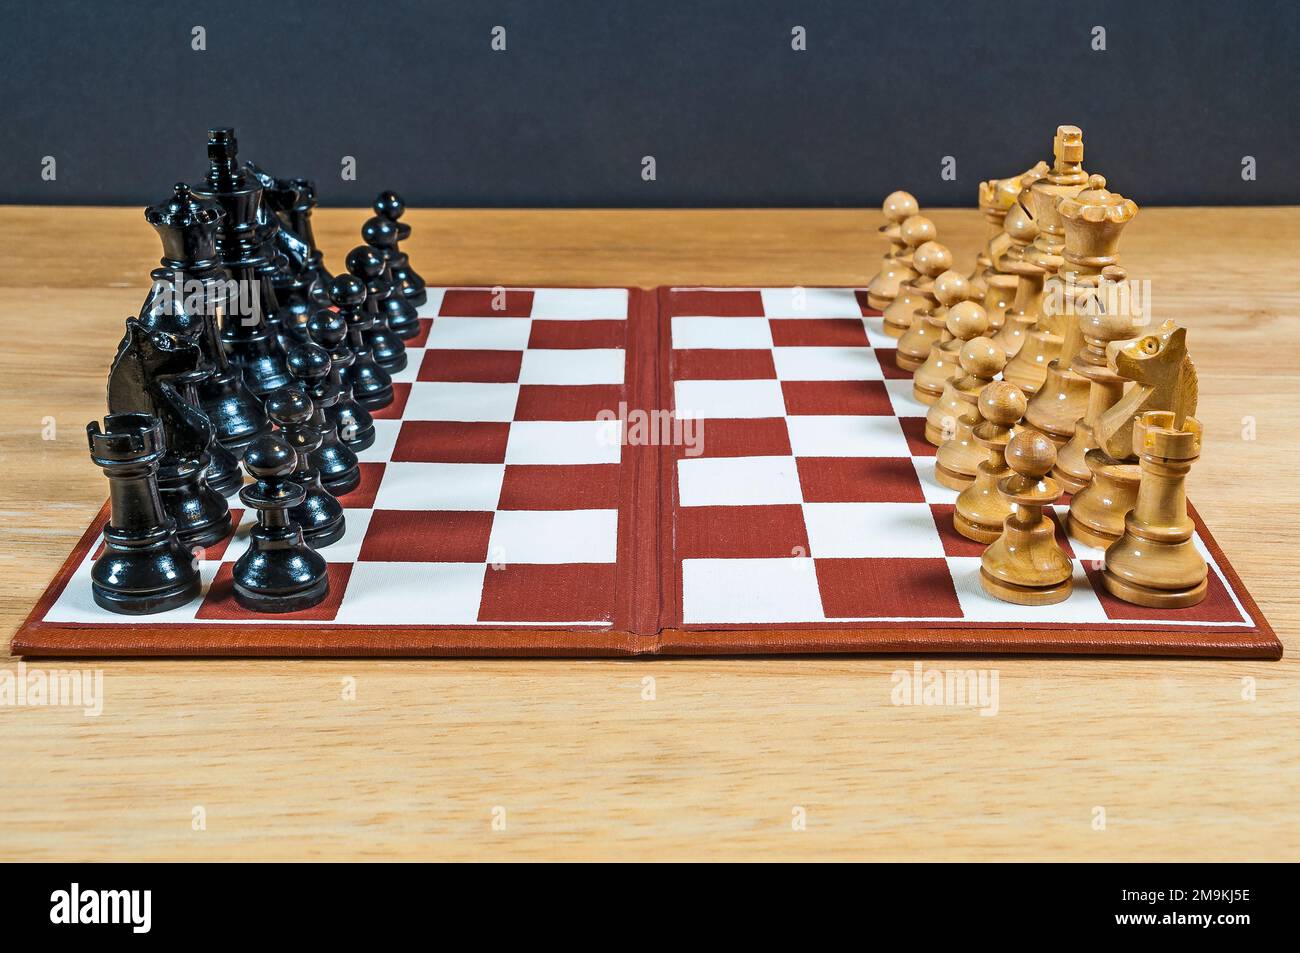 Small Chess Set and Chessboard as shown down middle of board with dark pieces on one side and light pieces on the other. Stock Photo